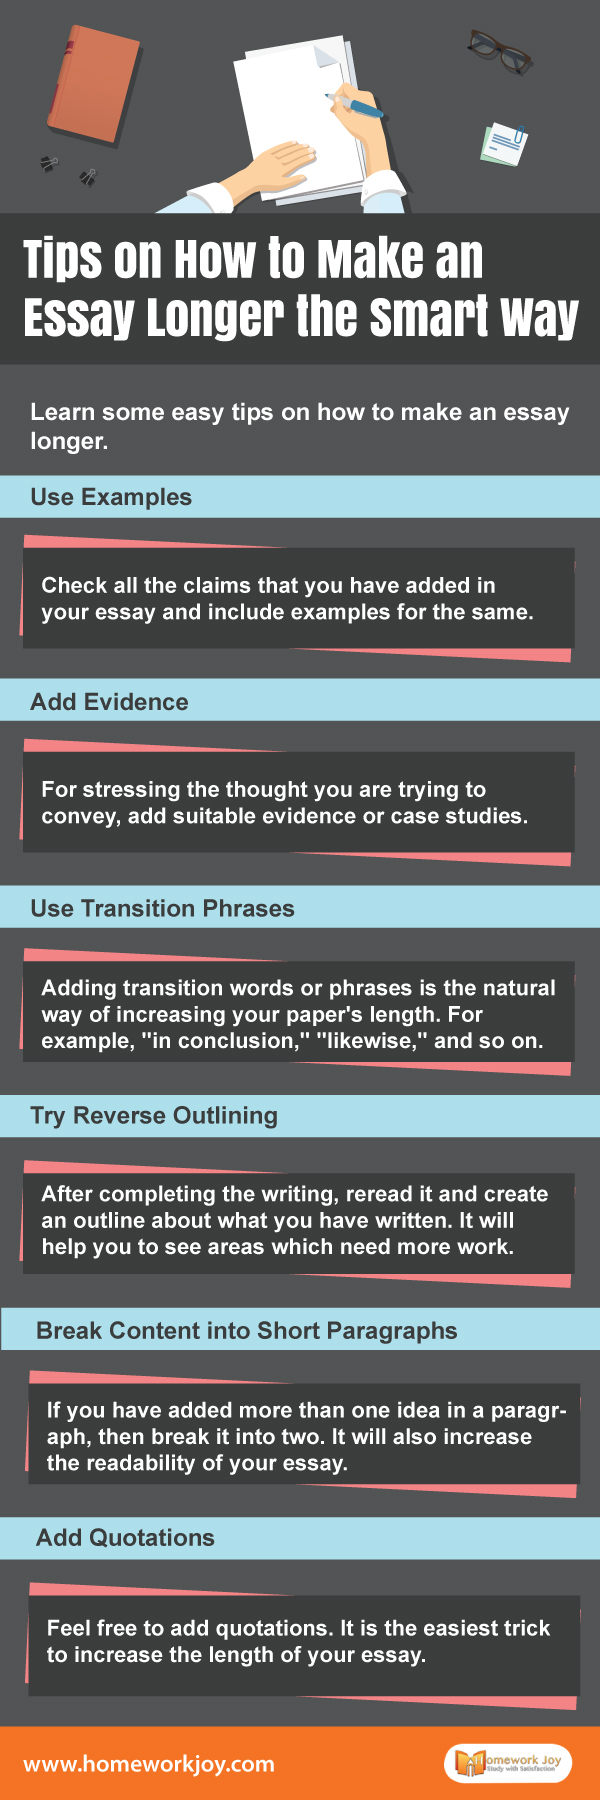 Tips on How to Make an Essay Longer the Smart Way